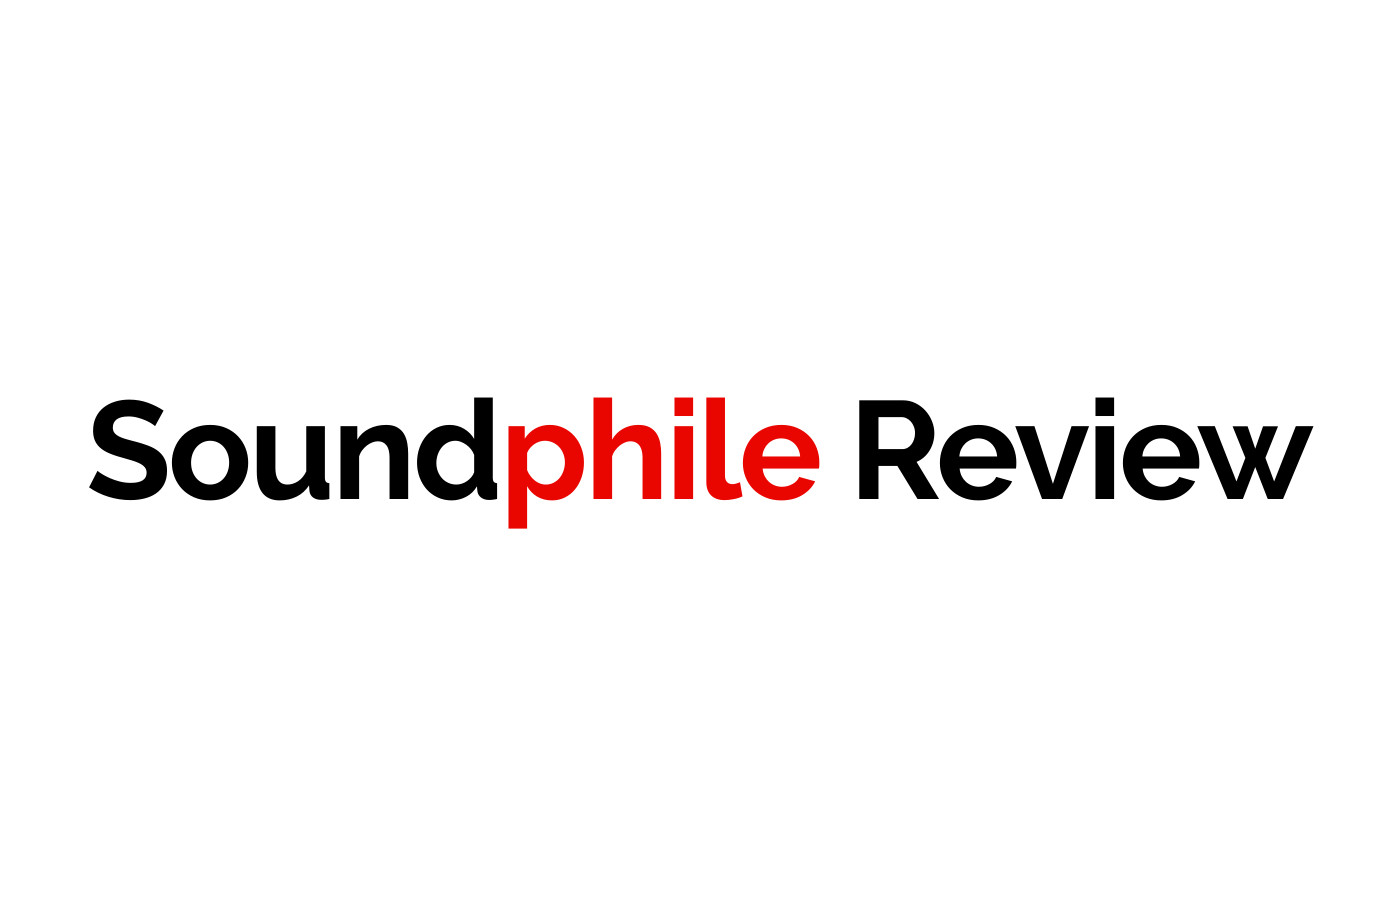 Why you will see ads on Soundphile Review